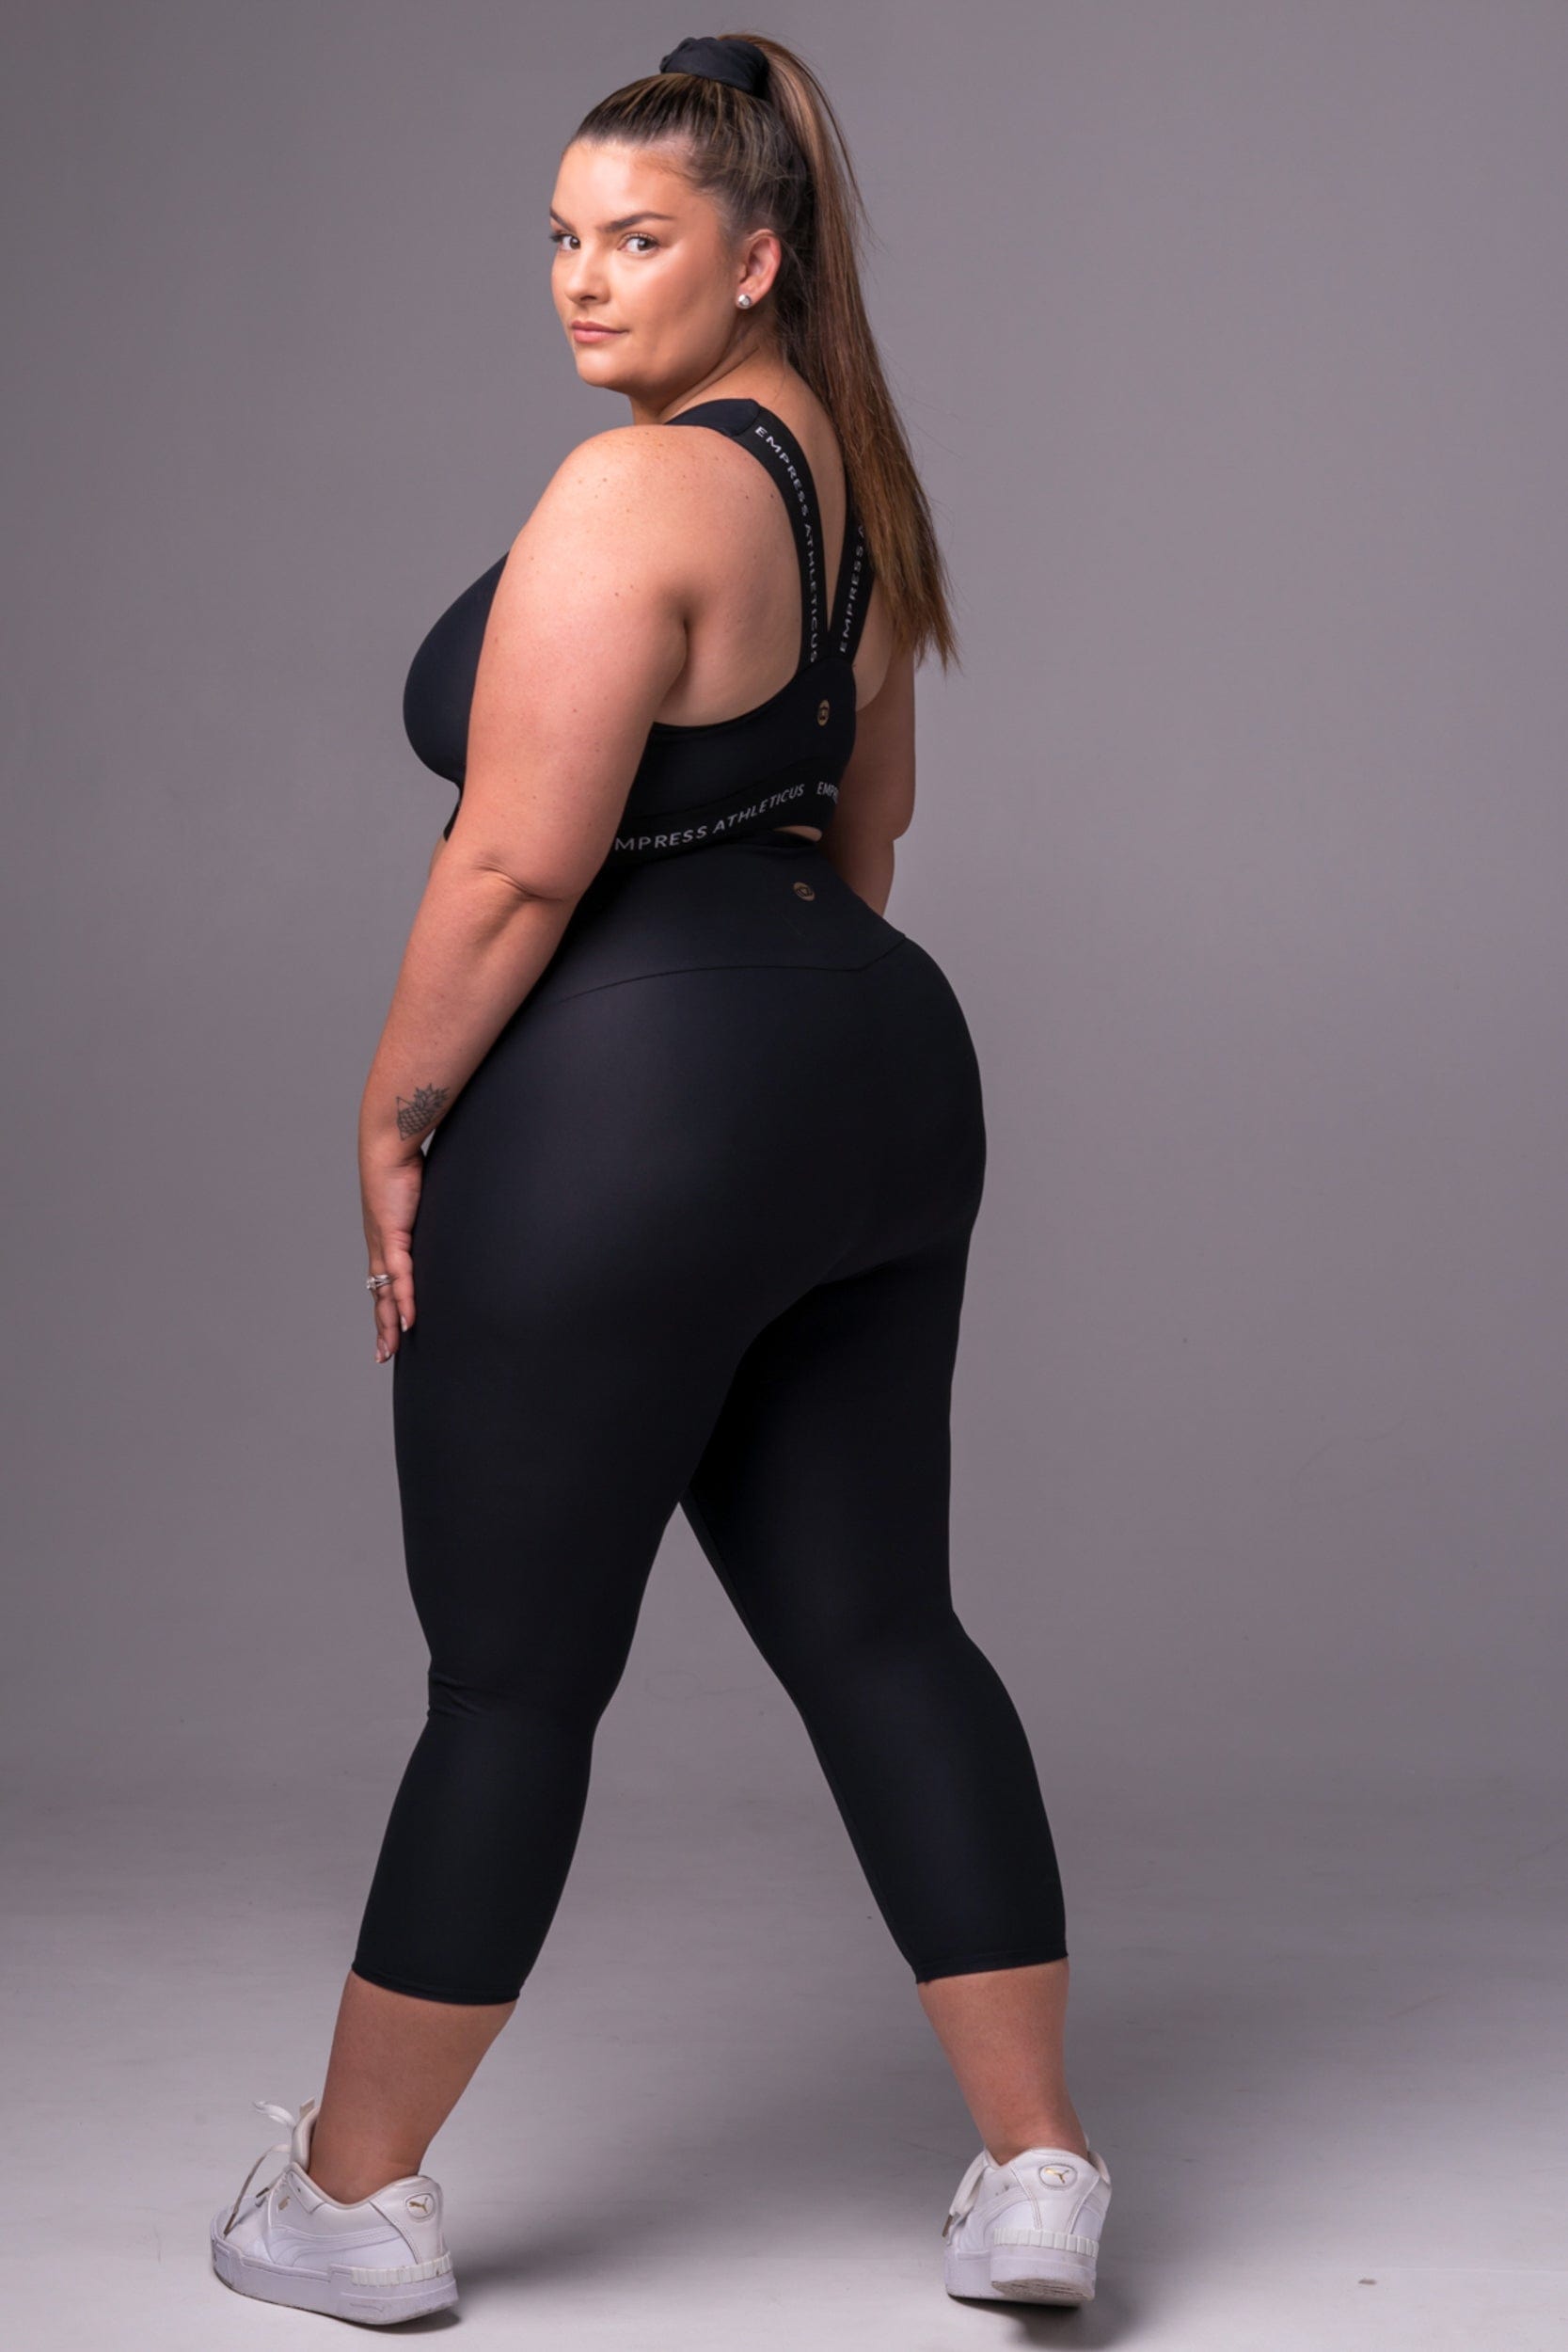 Black Capri Leggings: Comfort and Style for Any Workout